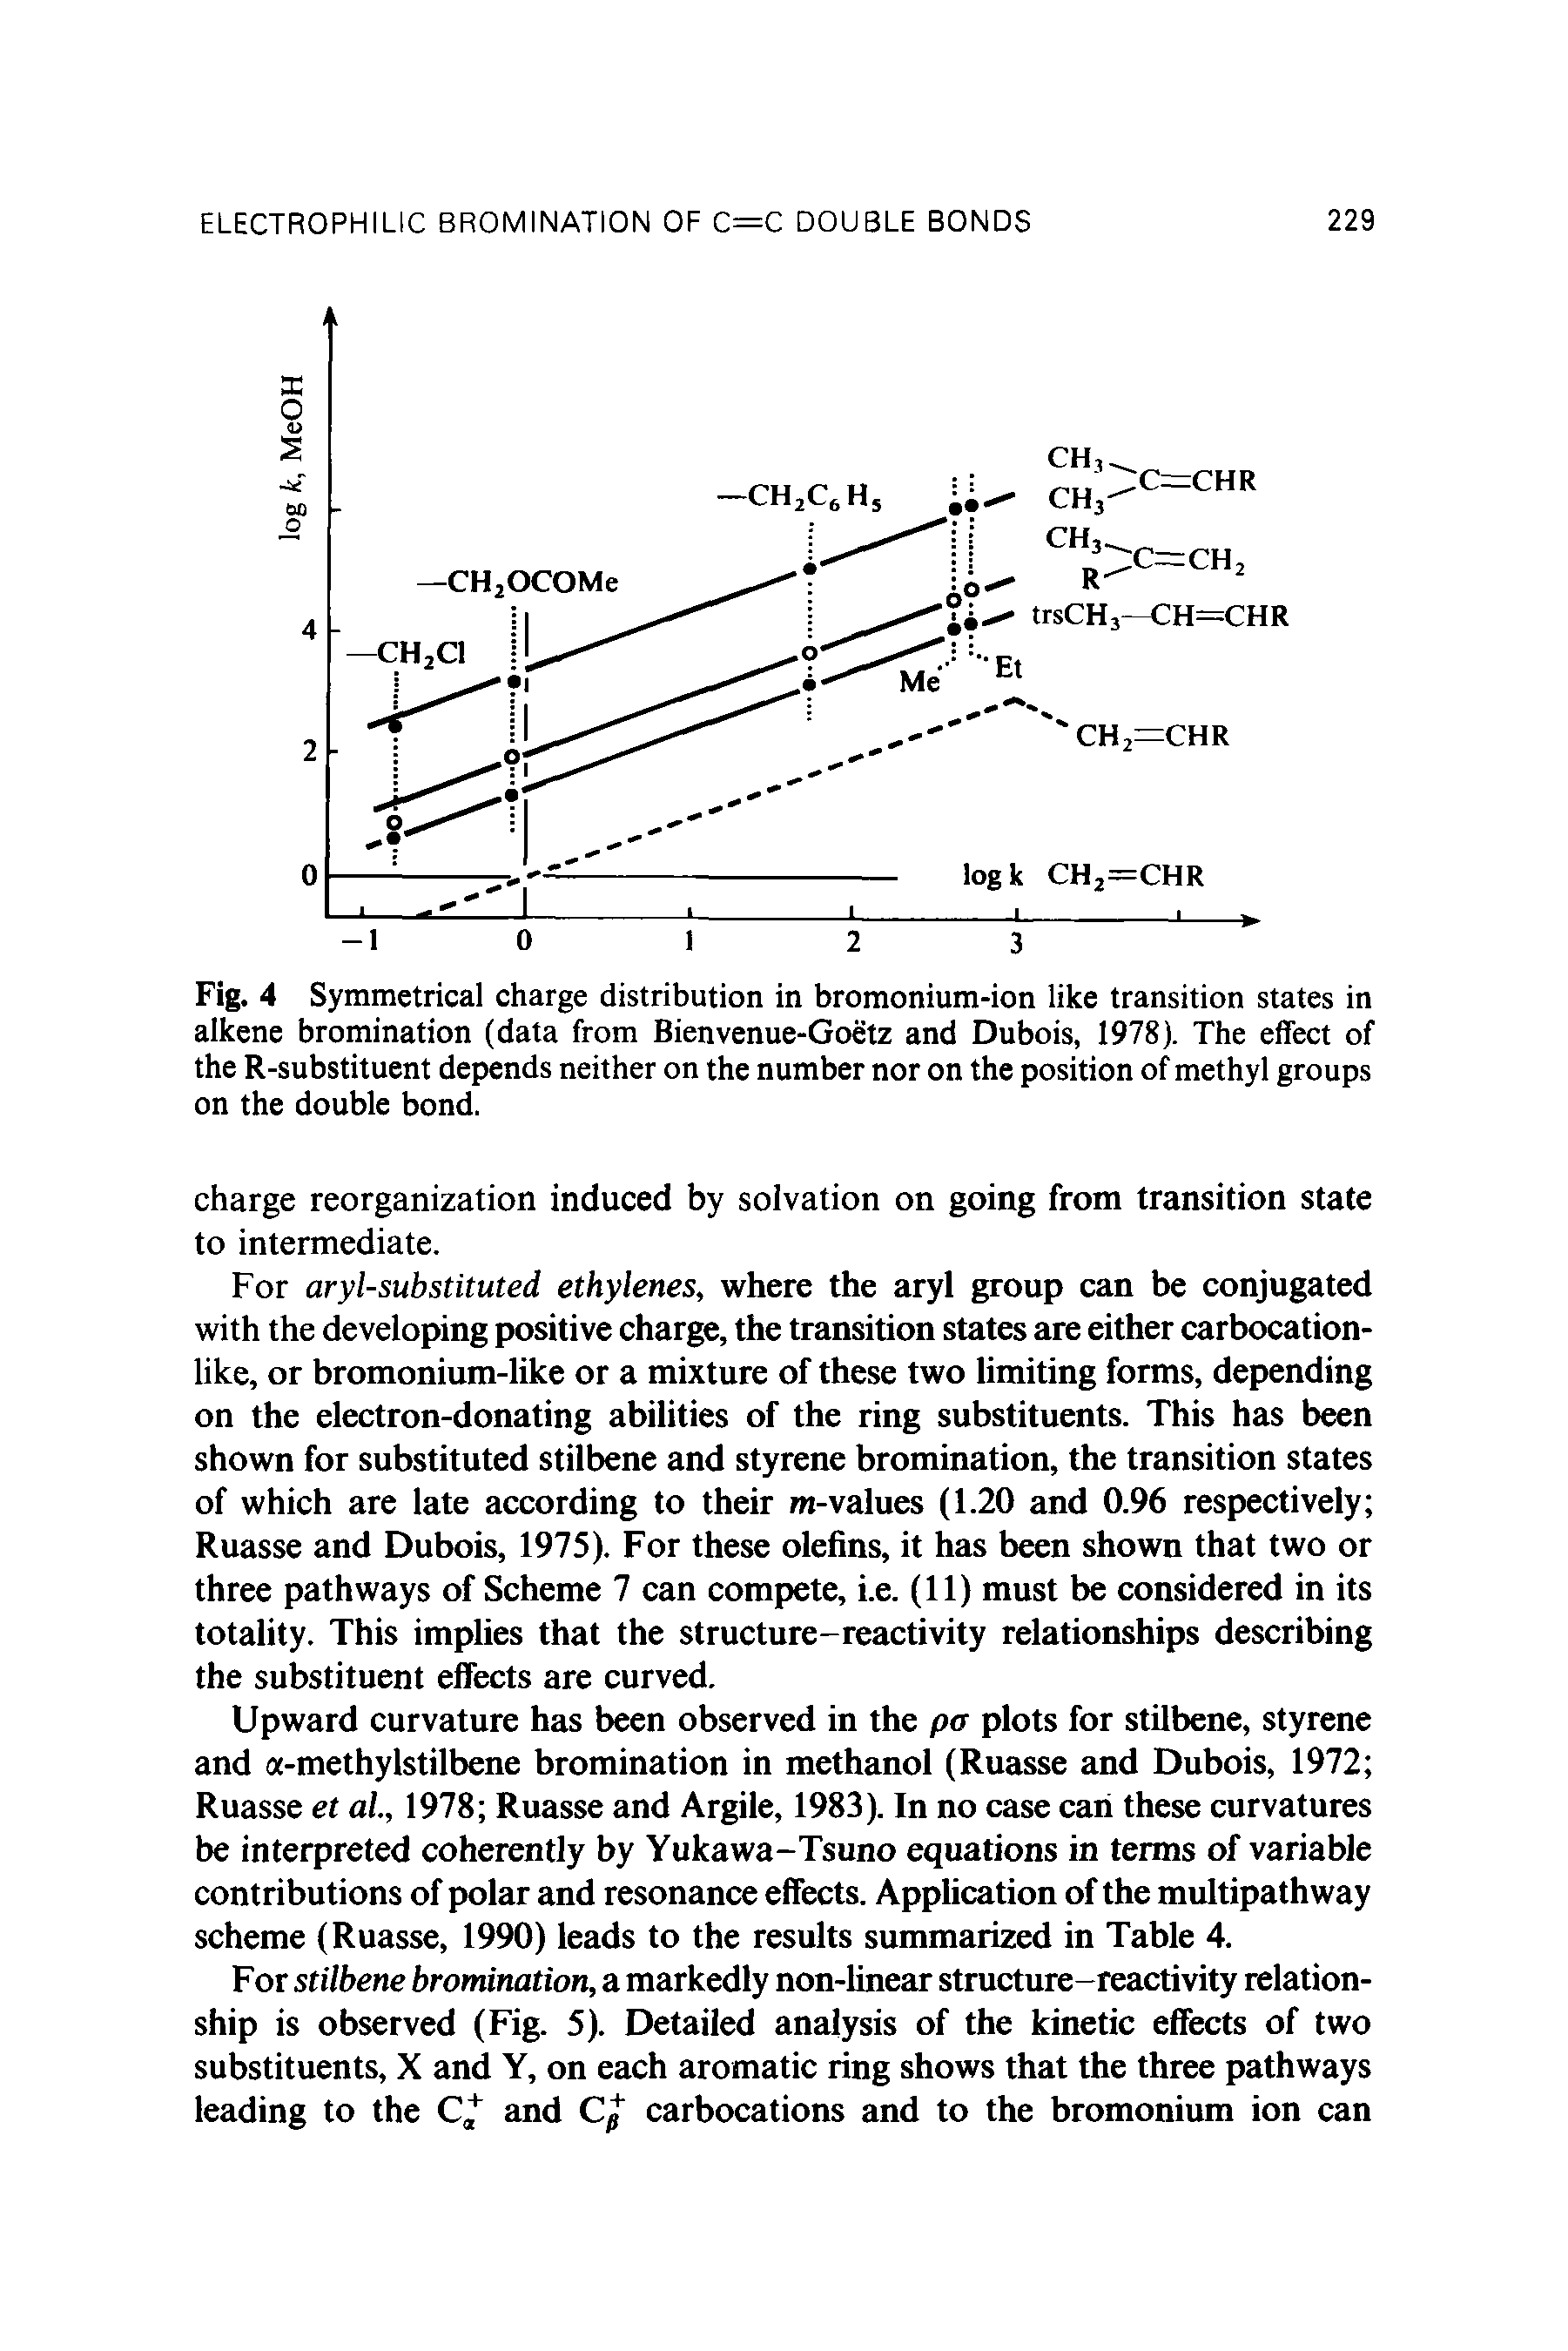 Fig. 4 Symmetrical charge distribution in bromonium-ion like transition states in alkene bromination (data from Bienvenue-Goetz and Dubois, 1978). The effect of the R-substituent depends neither on the number nor on the position of methyl groups on the double bond.